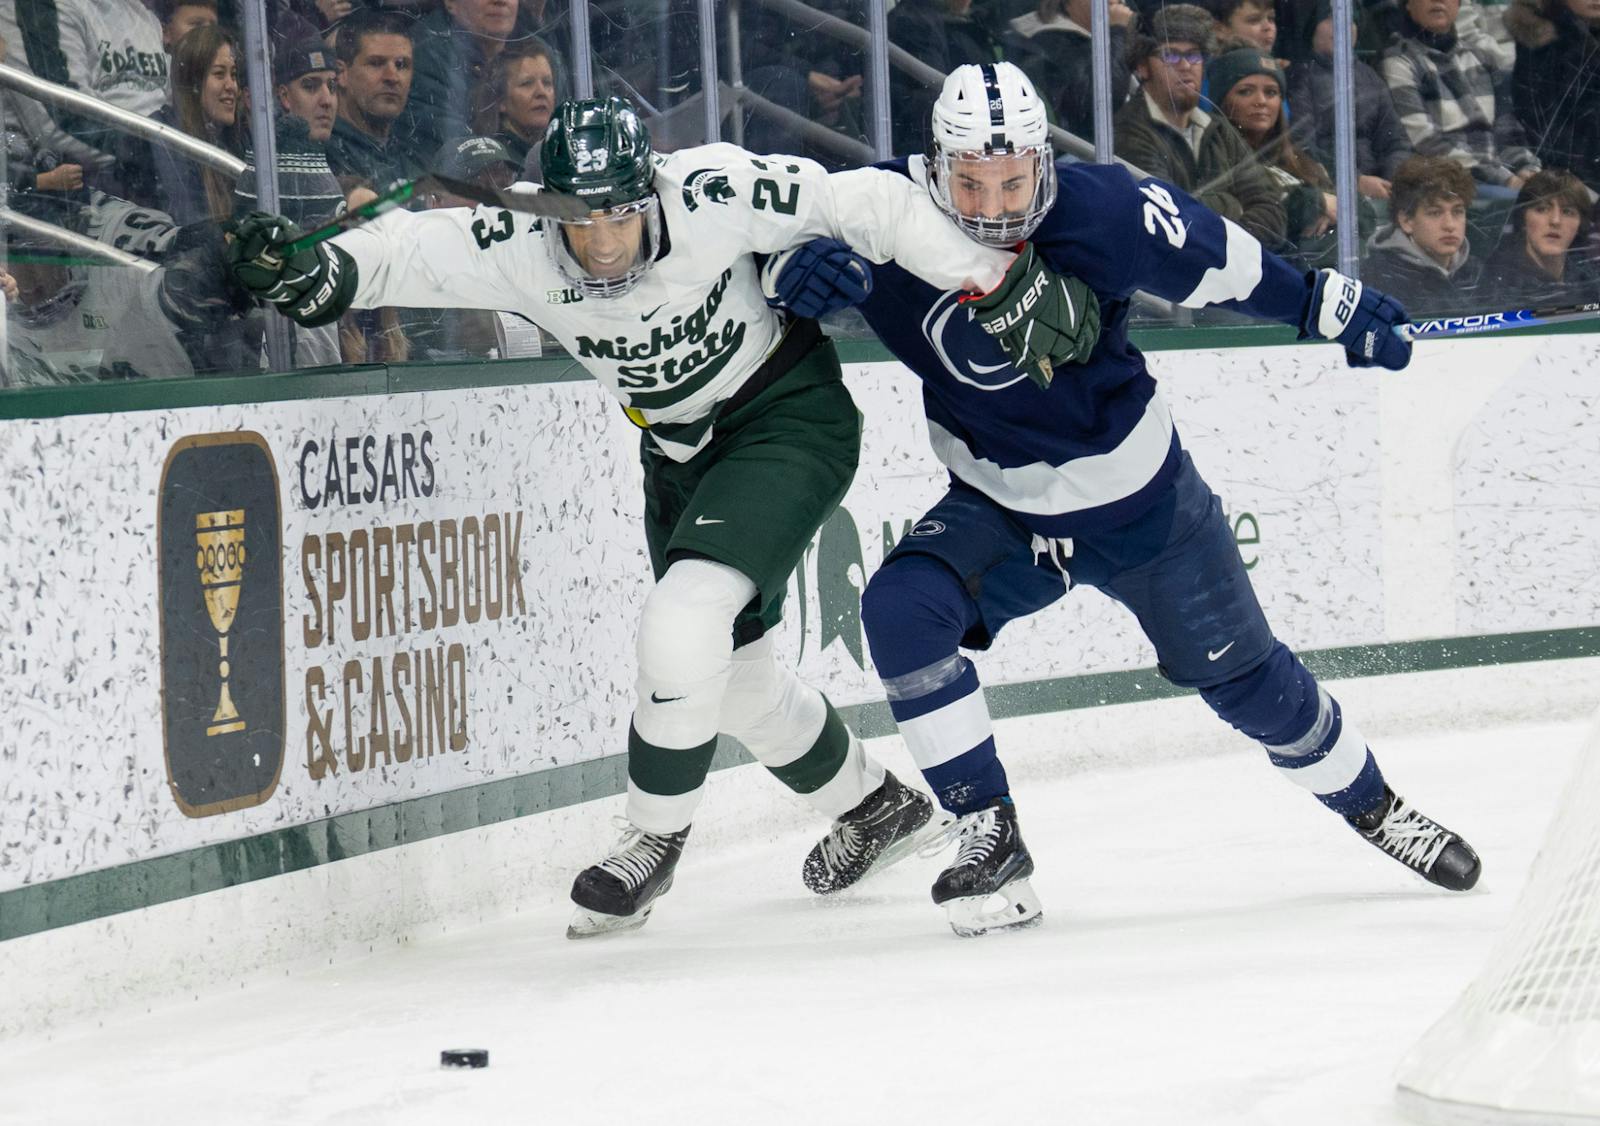 Penn State men's ice hockey: The Nittany Lions reflect on winning